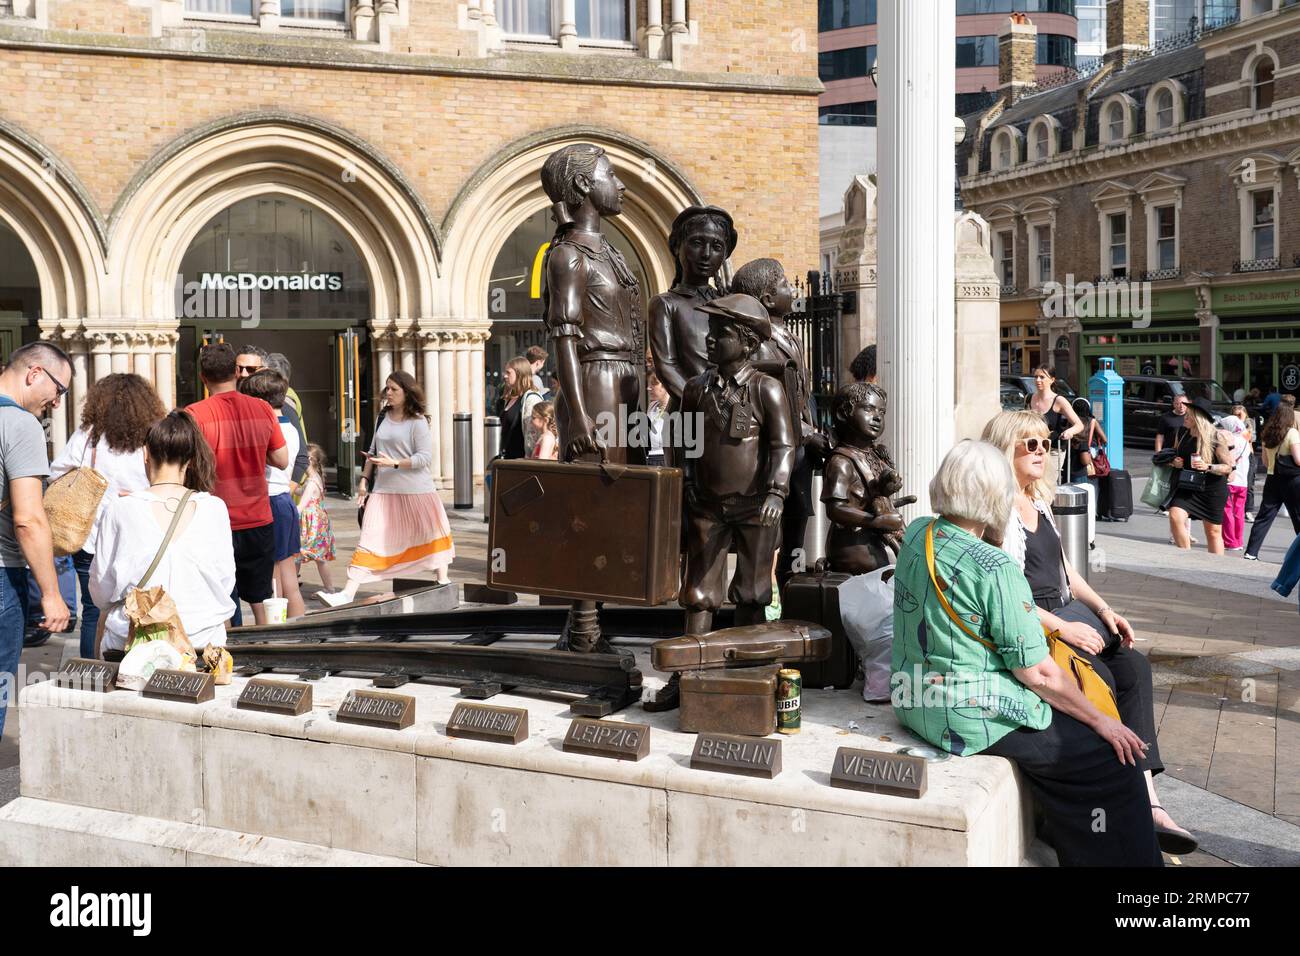 Kindertransport – The Arrival is a bronze memorial sculpture of rescued Jewish children by Frank Meisler outside Liverpool Street station, London, UK Stock Photo